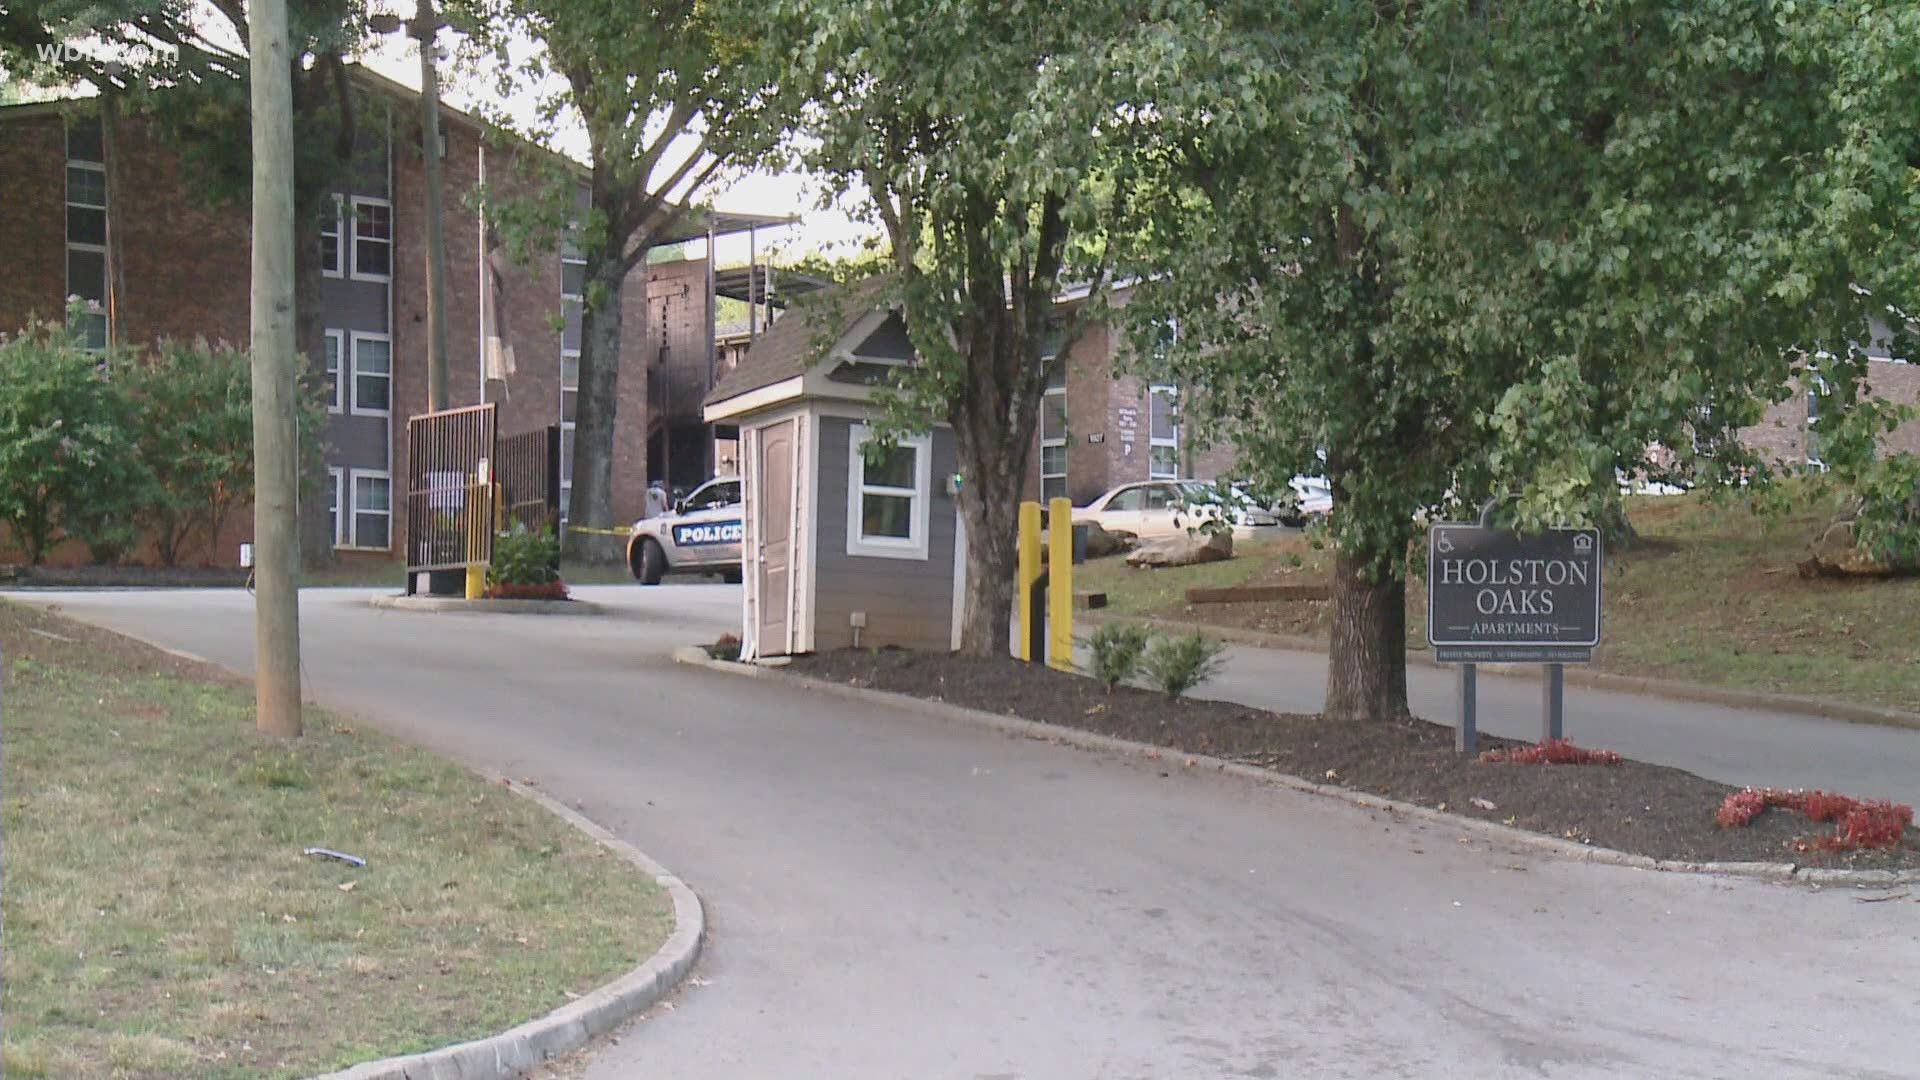 Knoxville police said that the shooting happened at around 5 p.m. Wednesday at the Holston Oaks Apartments.